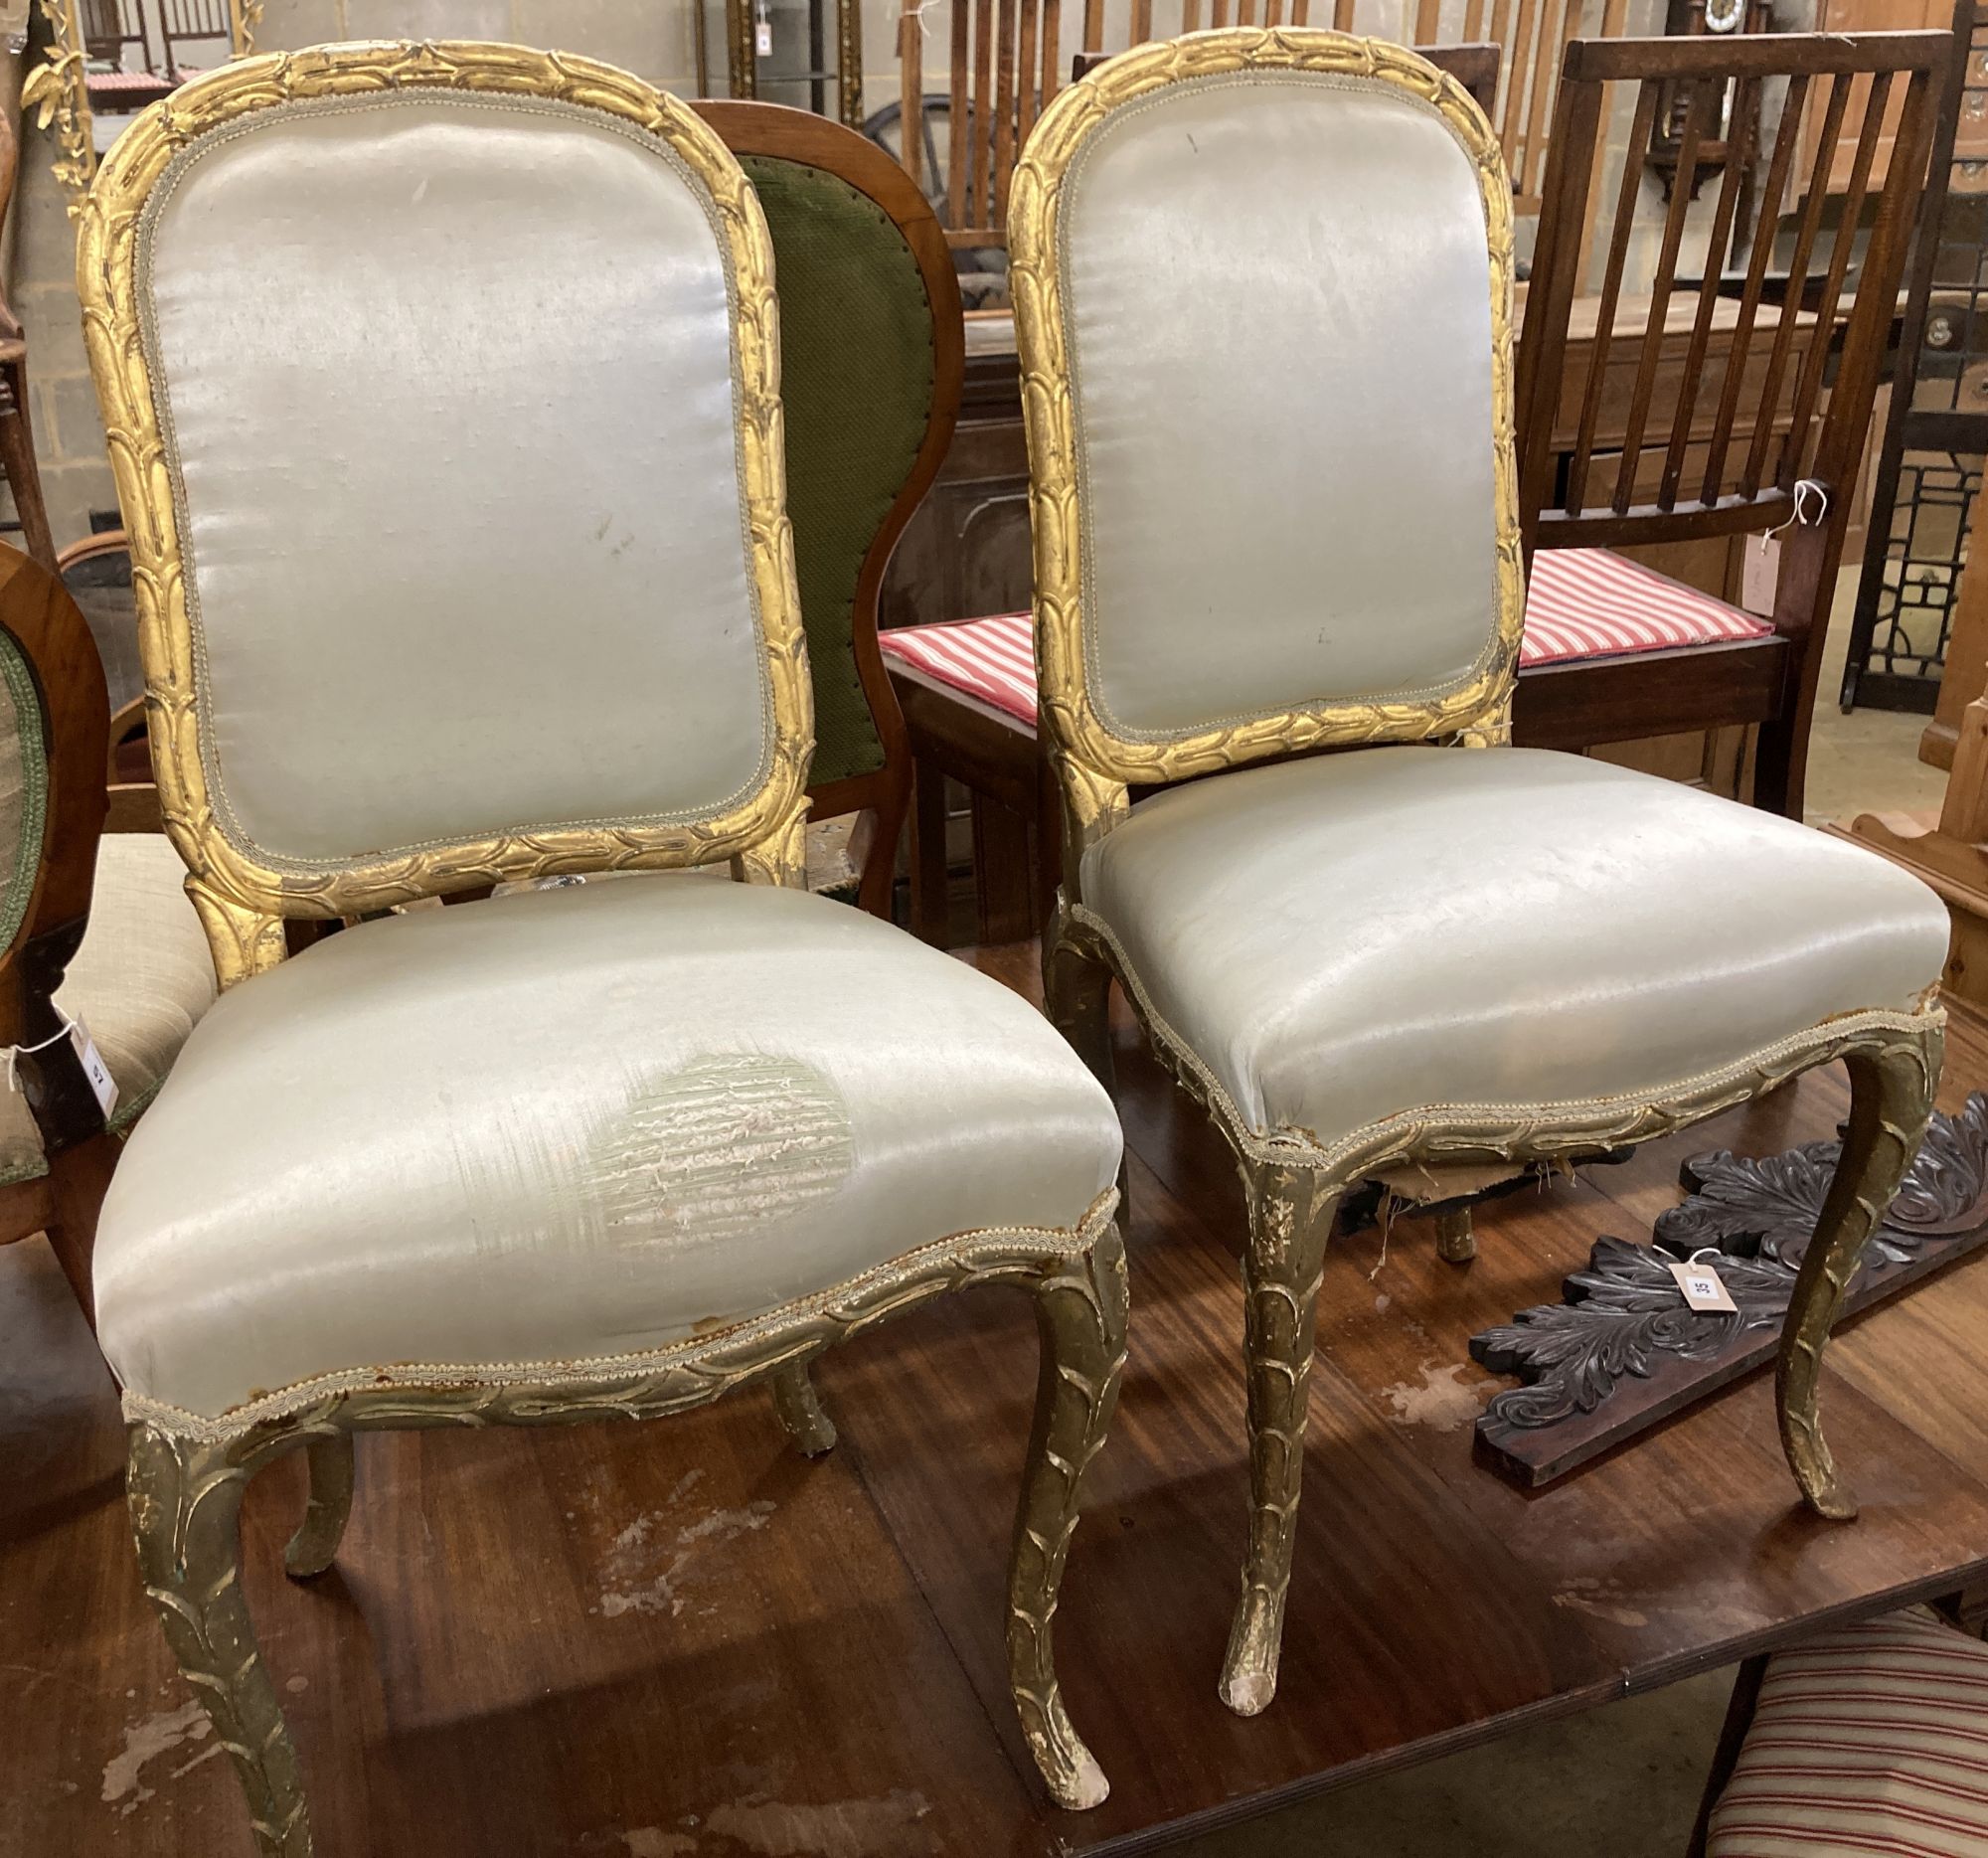 A pair of 20th century giltwood side chairs, width 50cm, depth 40cm, height 96cm